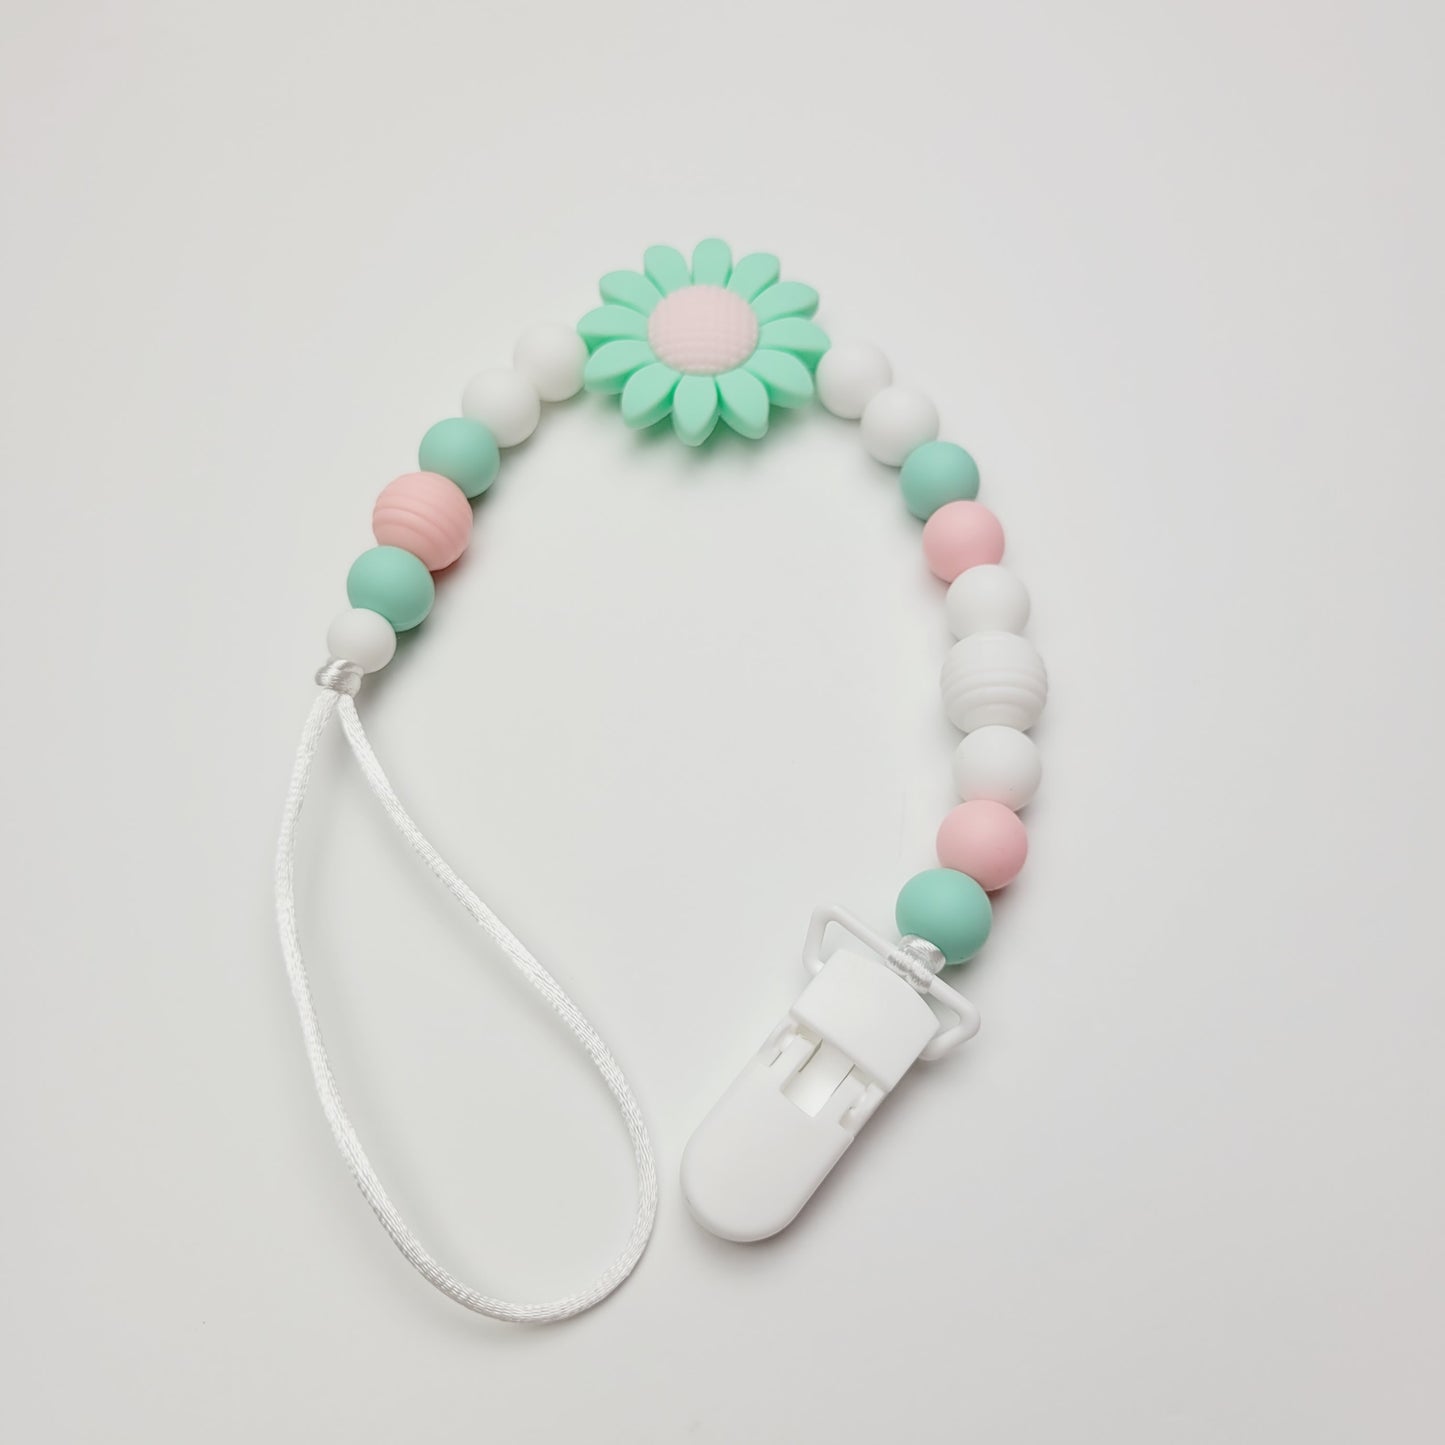 Silicone pacifier clip - Green flower and white and pink beads